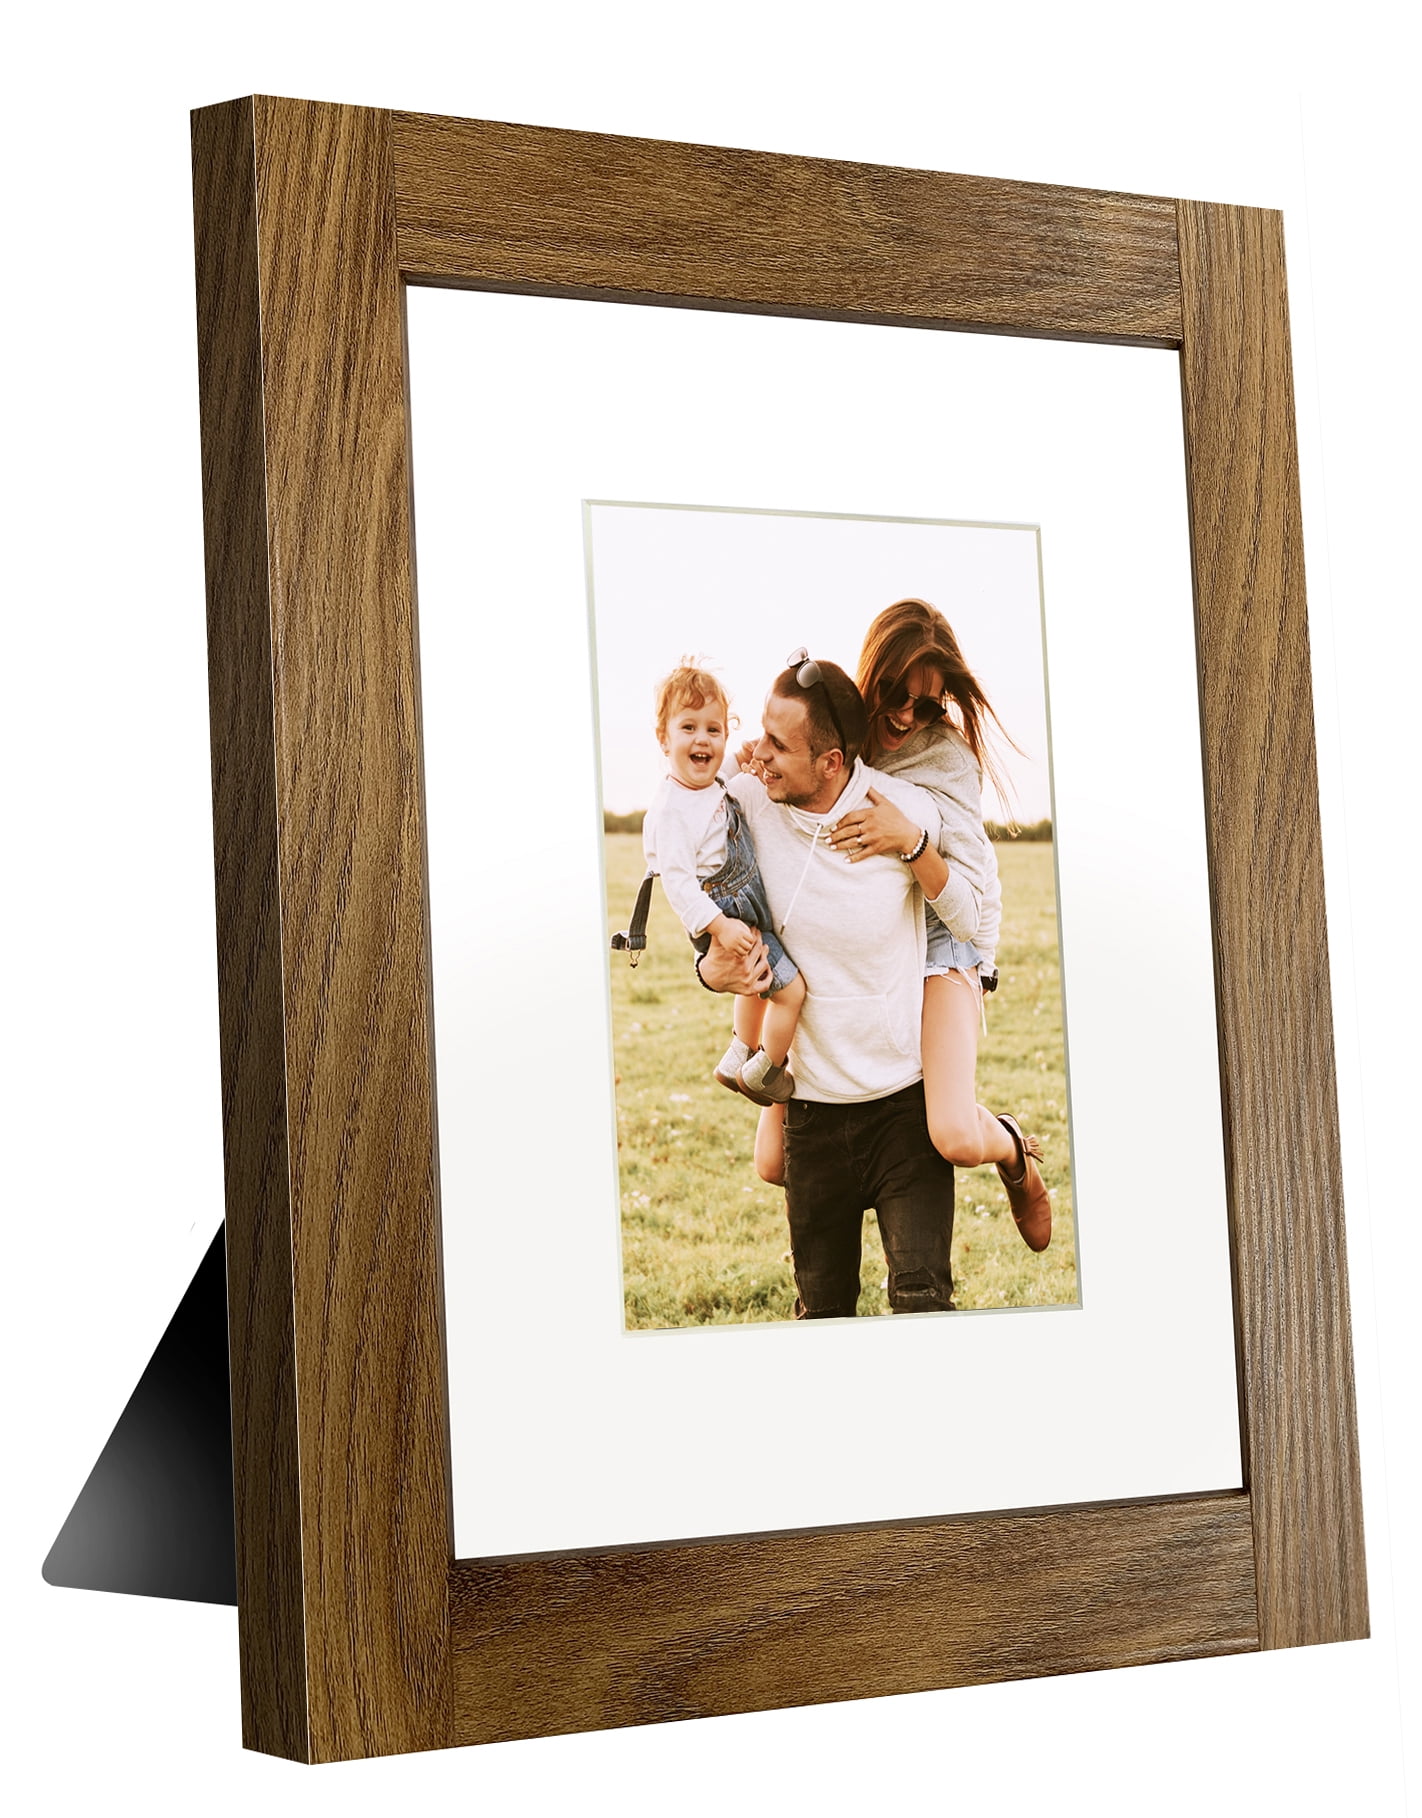 Mainstays 8x10 Matted to 5x7 Carpenter Joint Walnut Finish Tabletop Frame